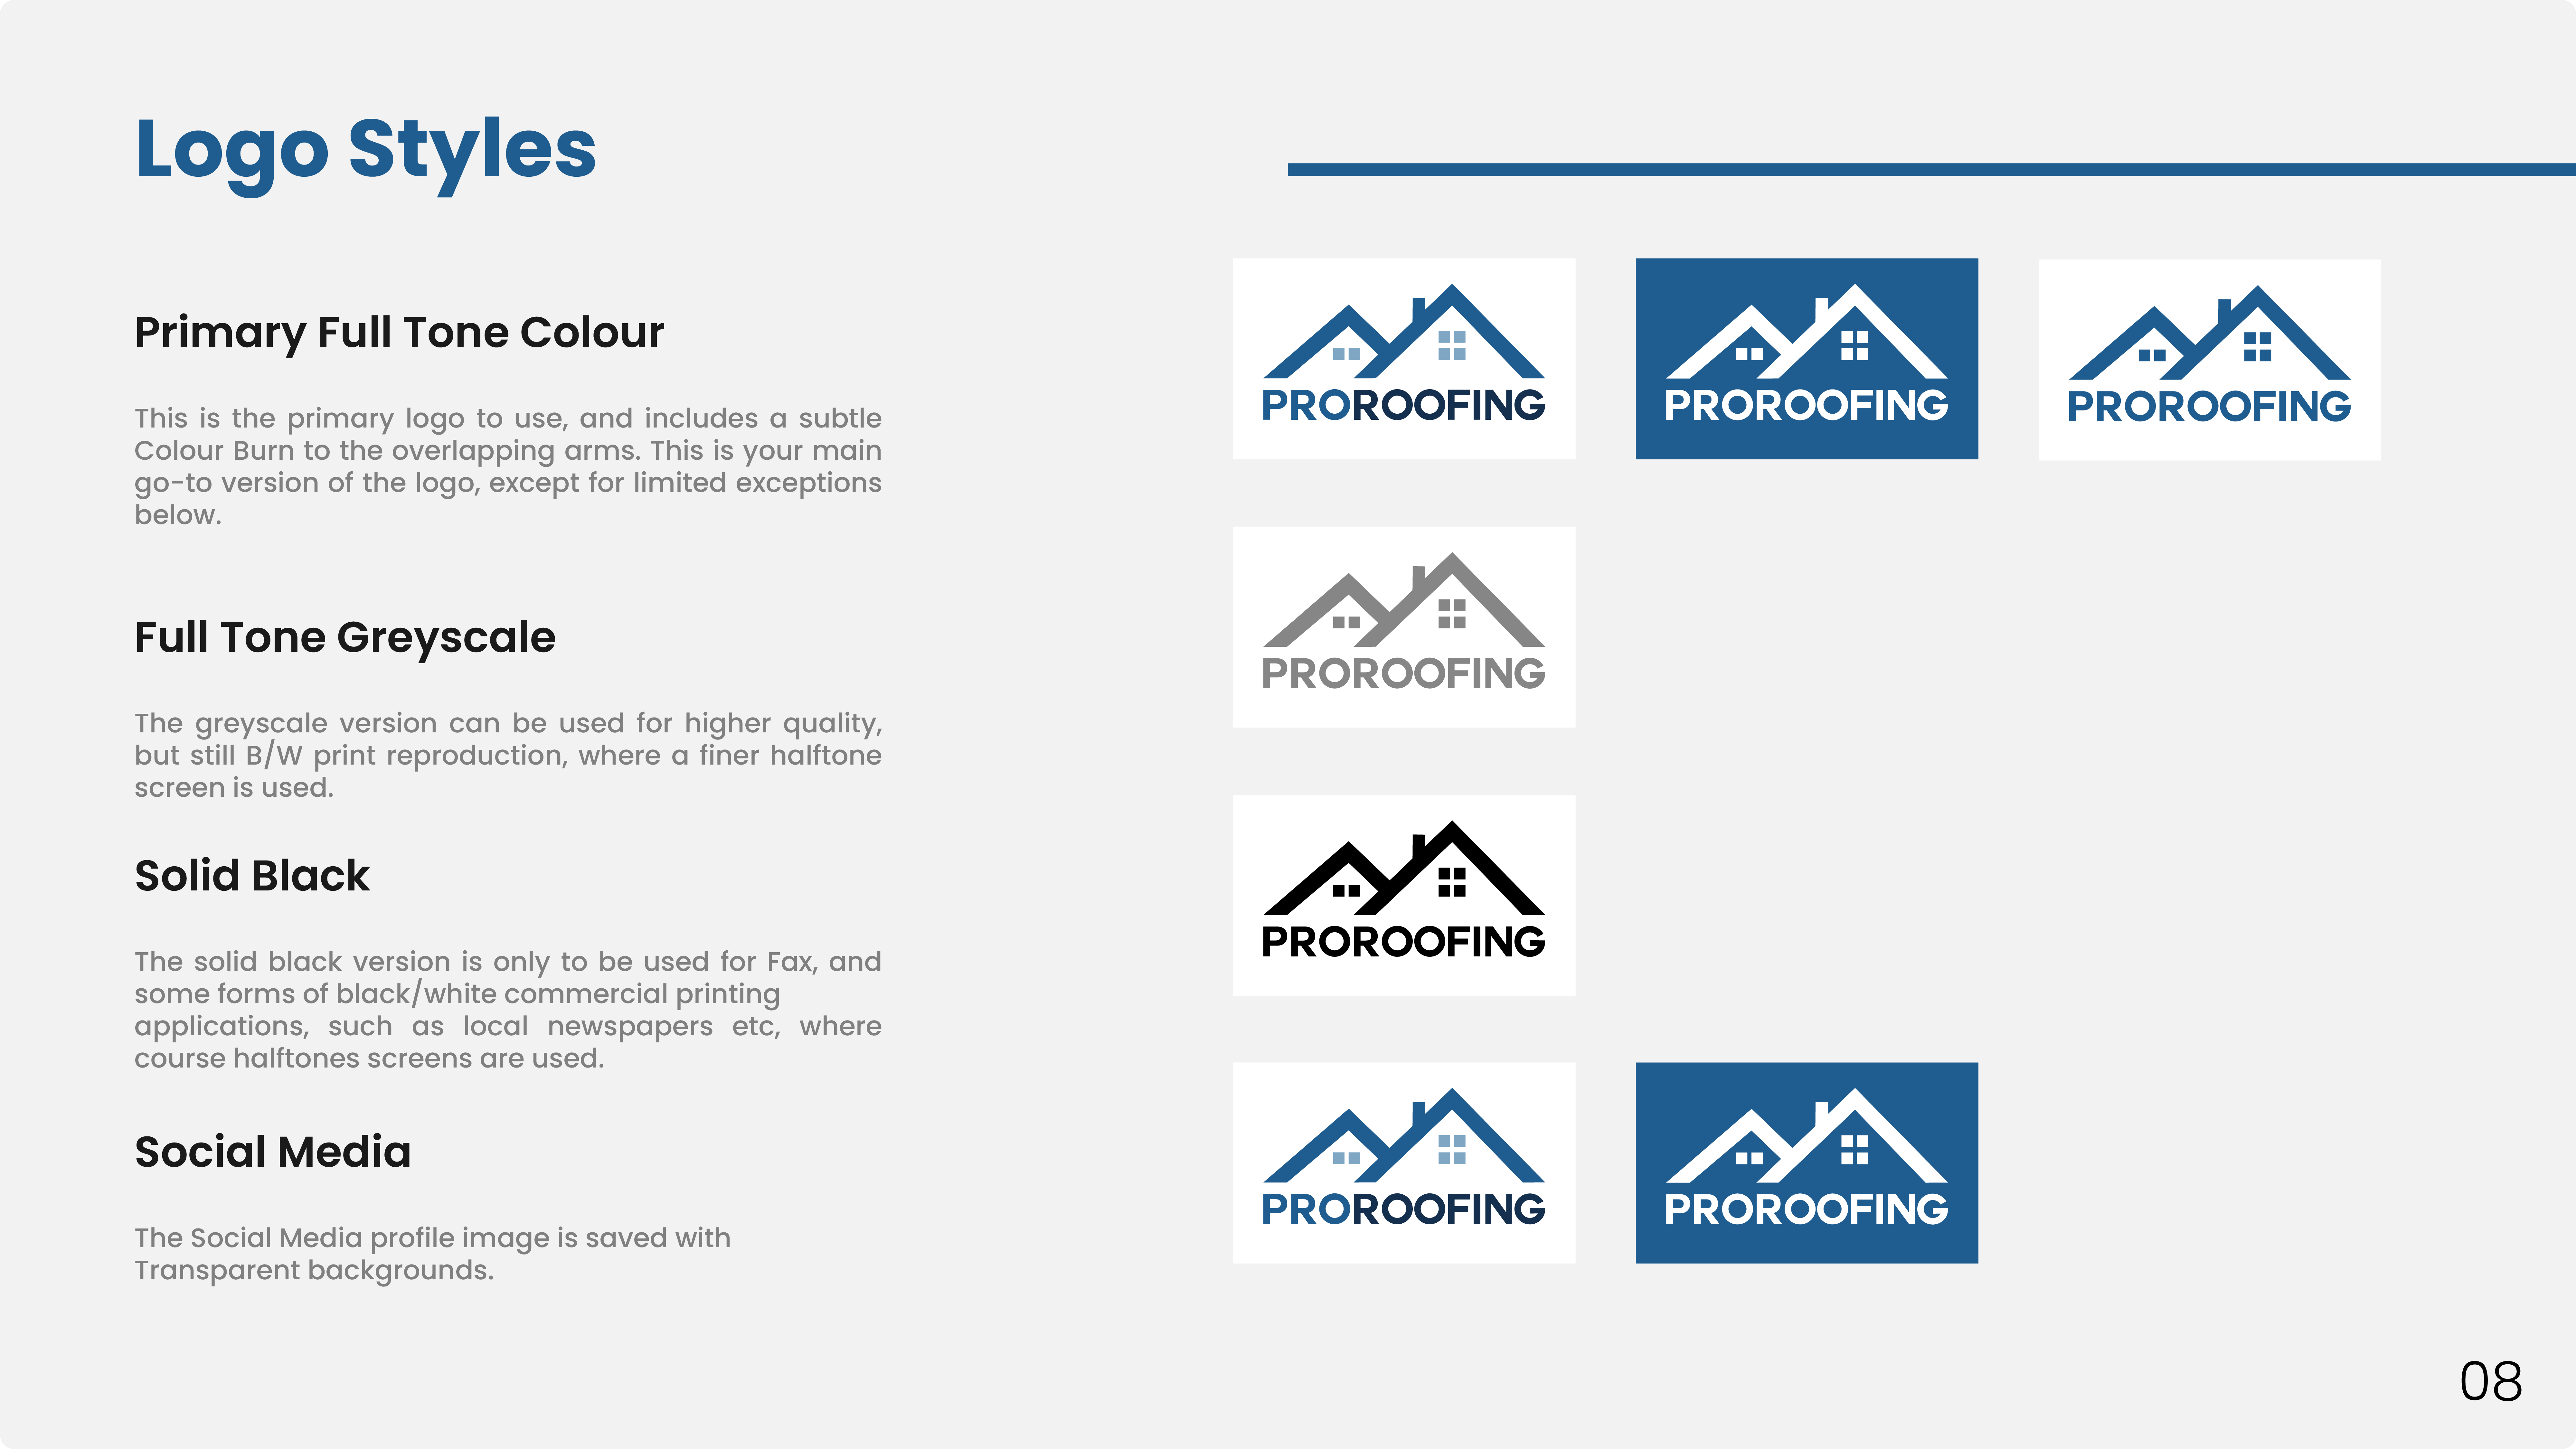 Pro Roofing - Pro roofing Brand Guidelines 10 - New Minds Group